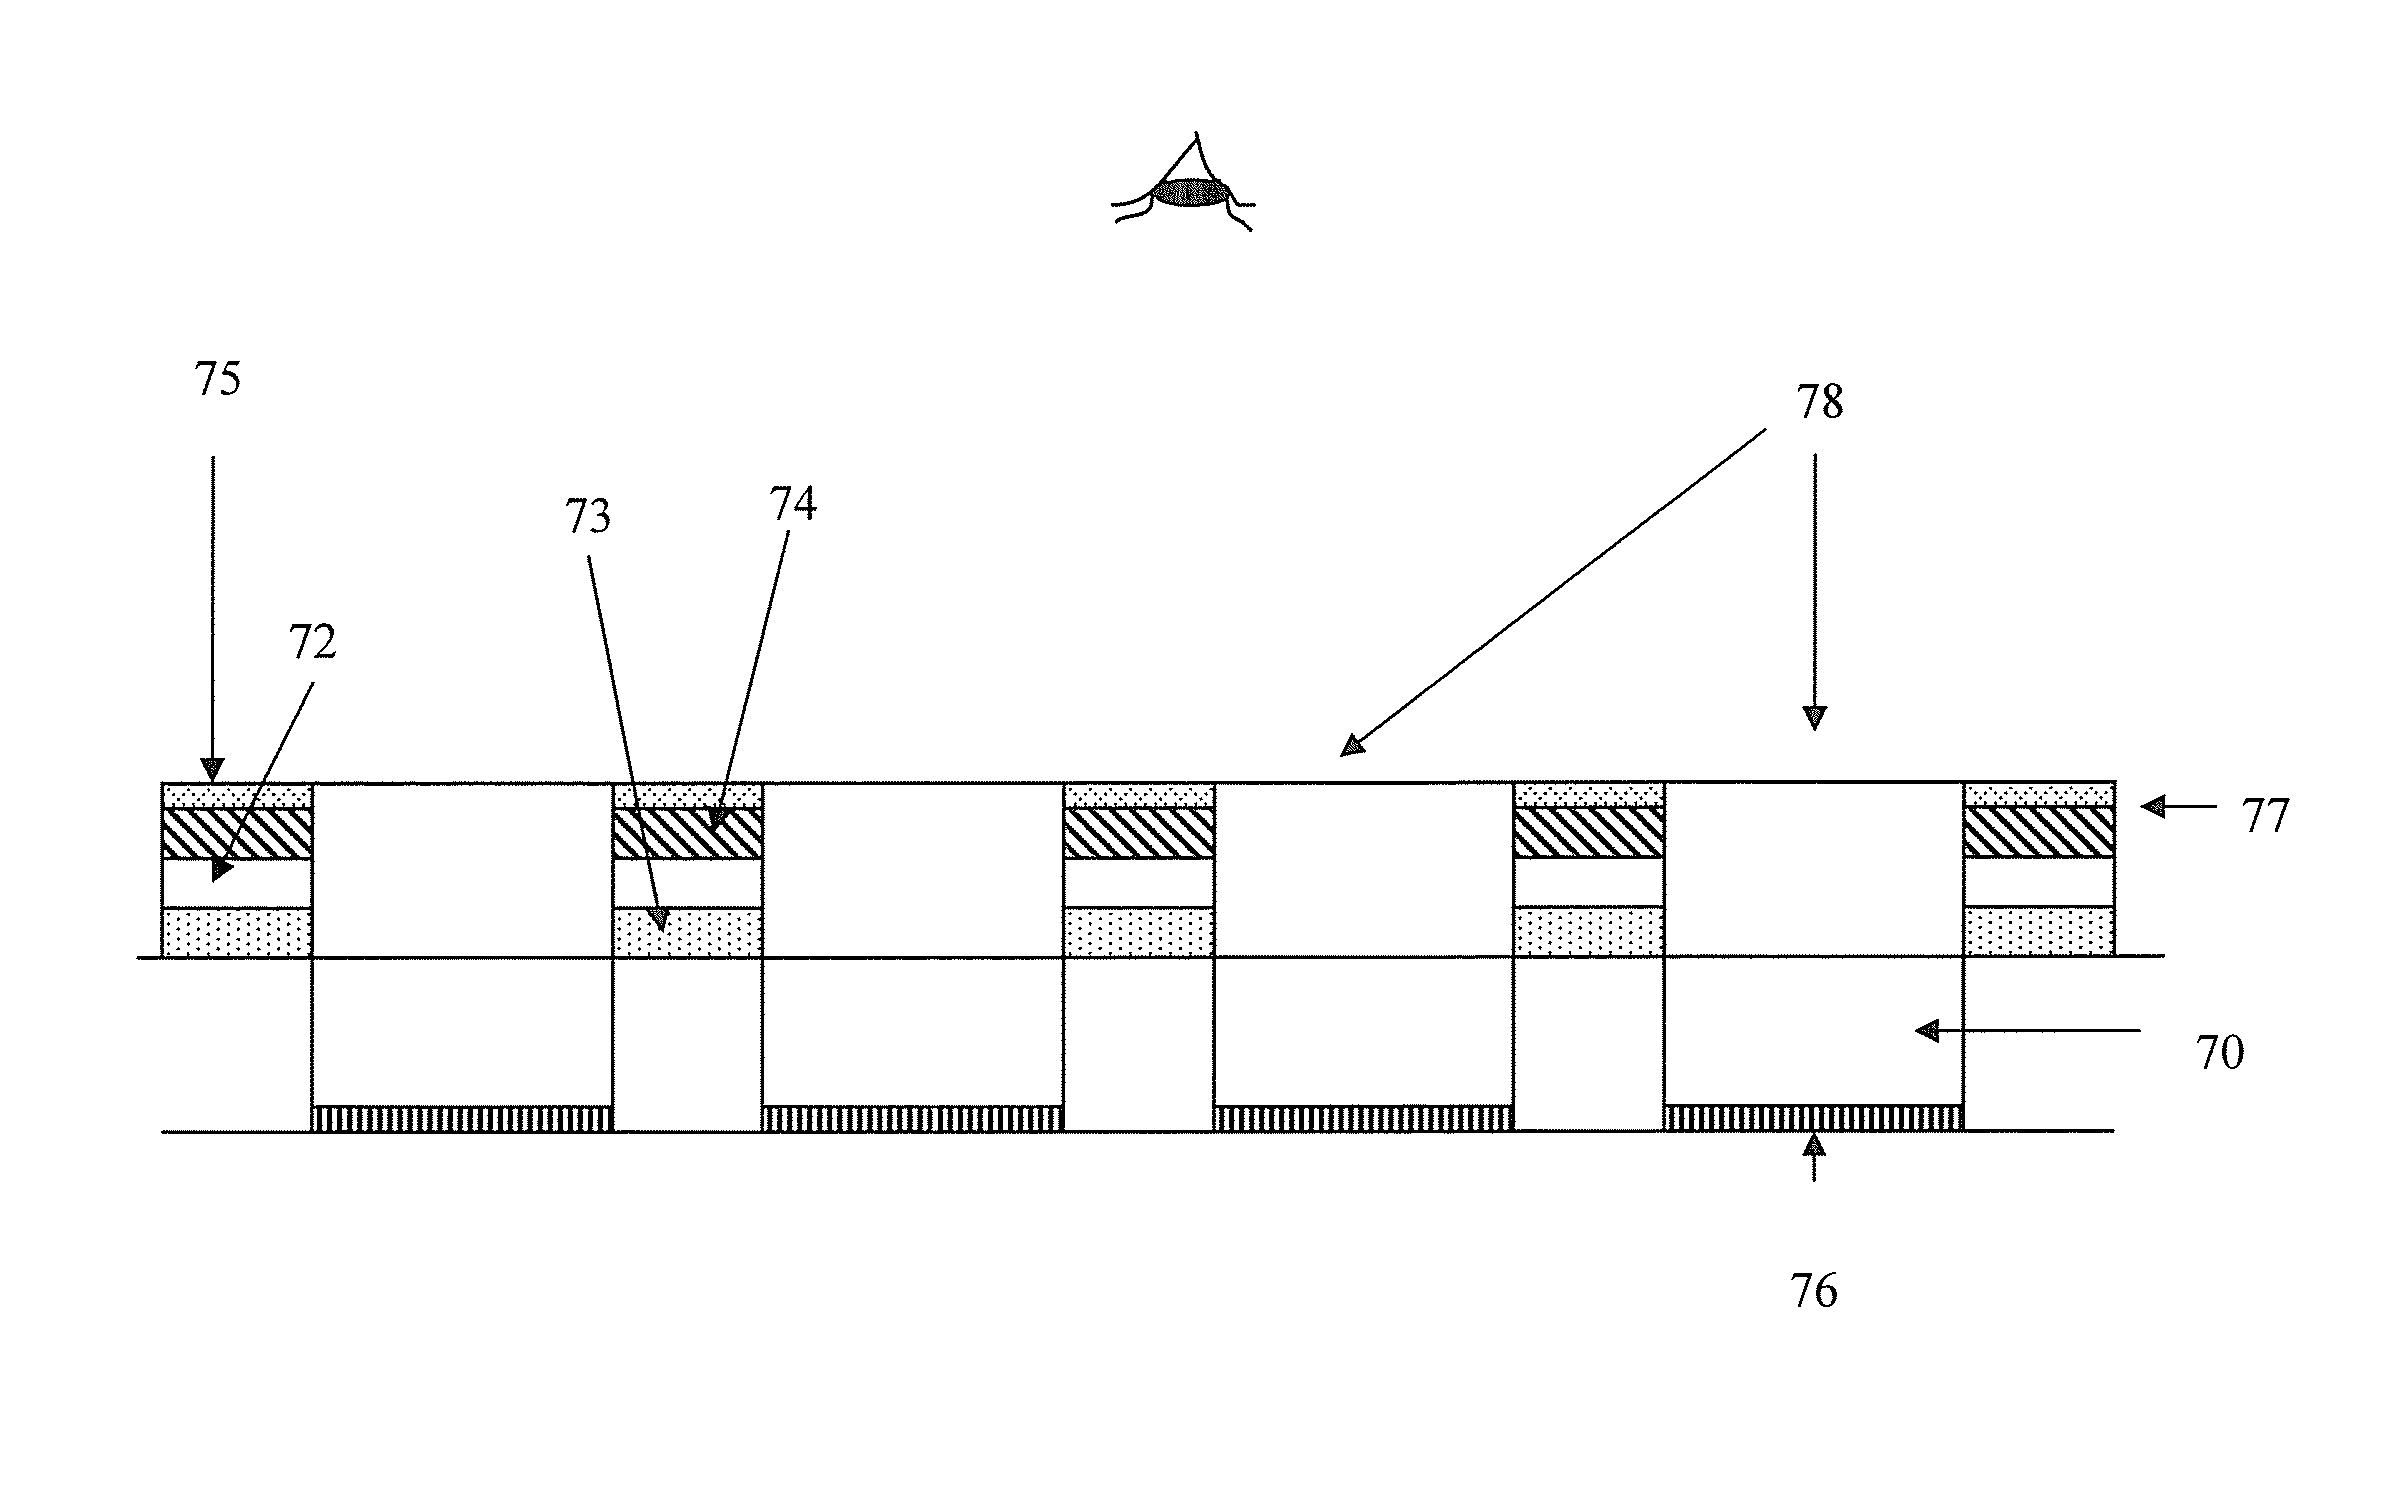 Front light system for reflective displays